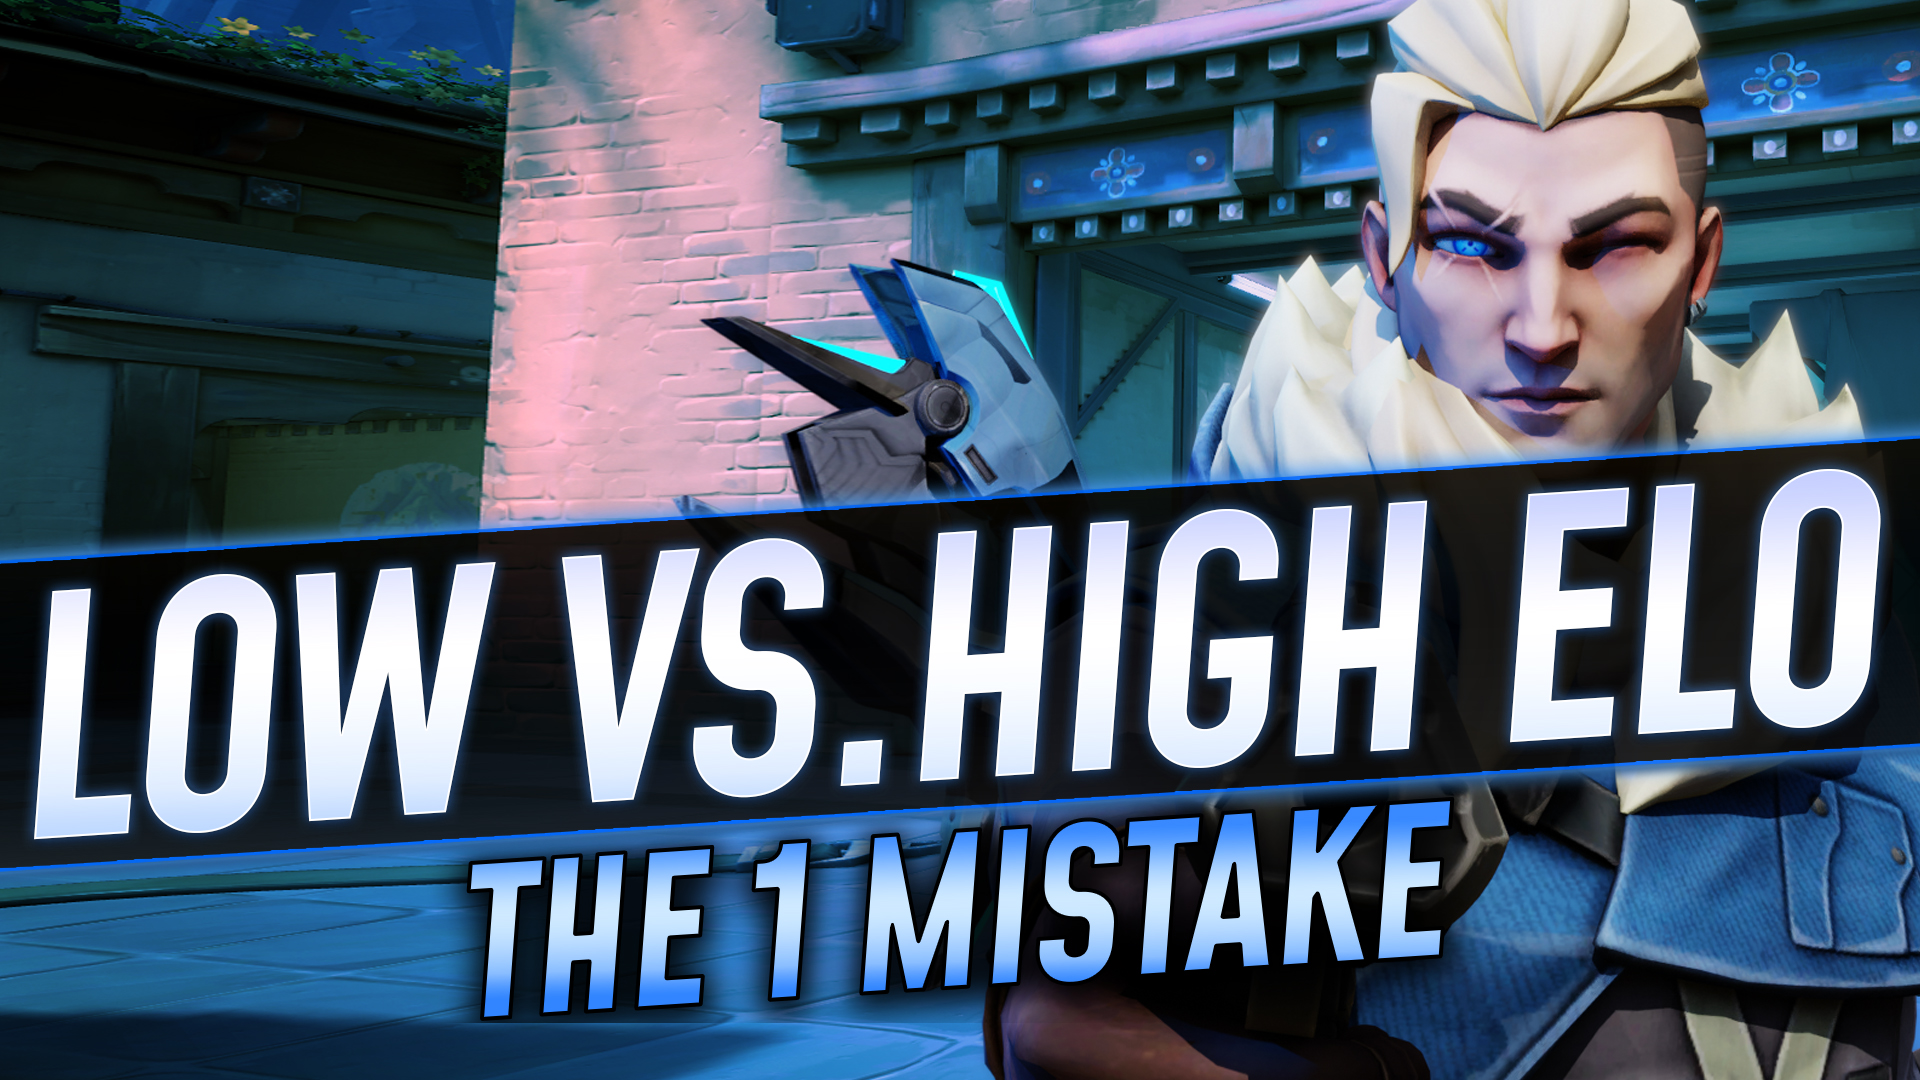 The 1 Mistake that Separates Low from High ELO - GameLeap